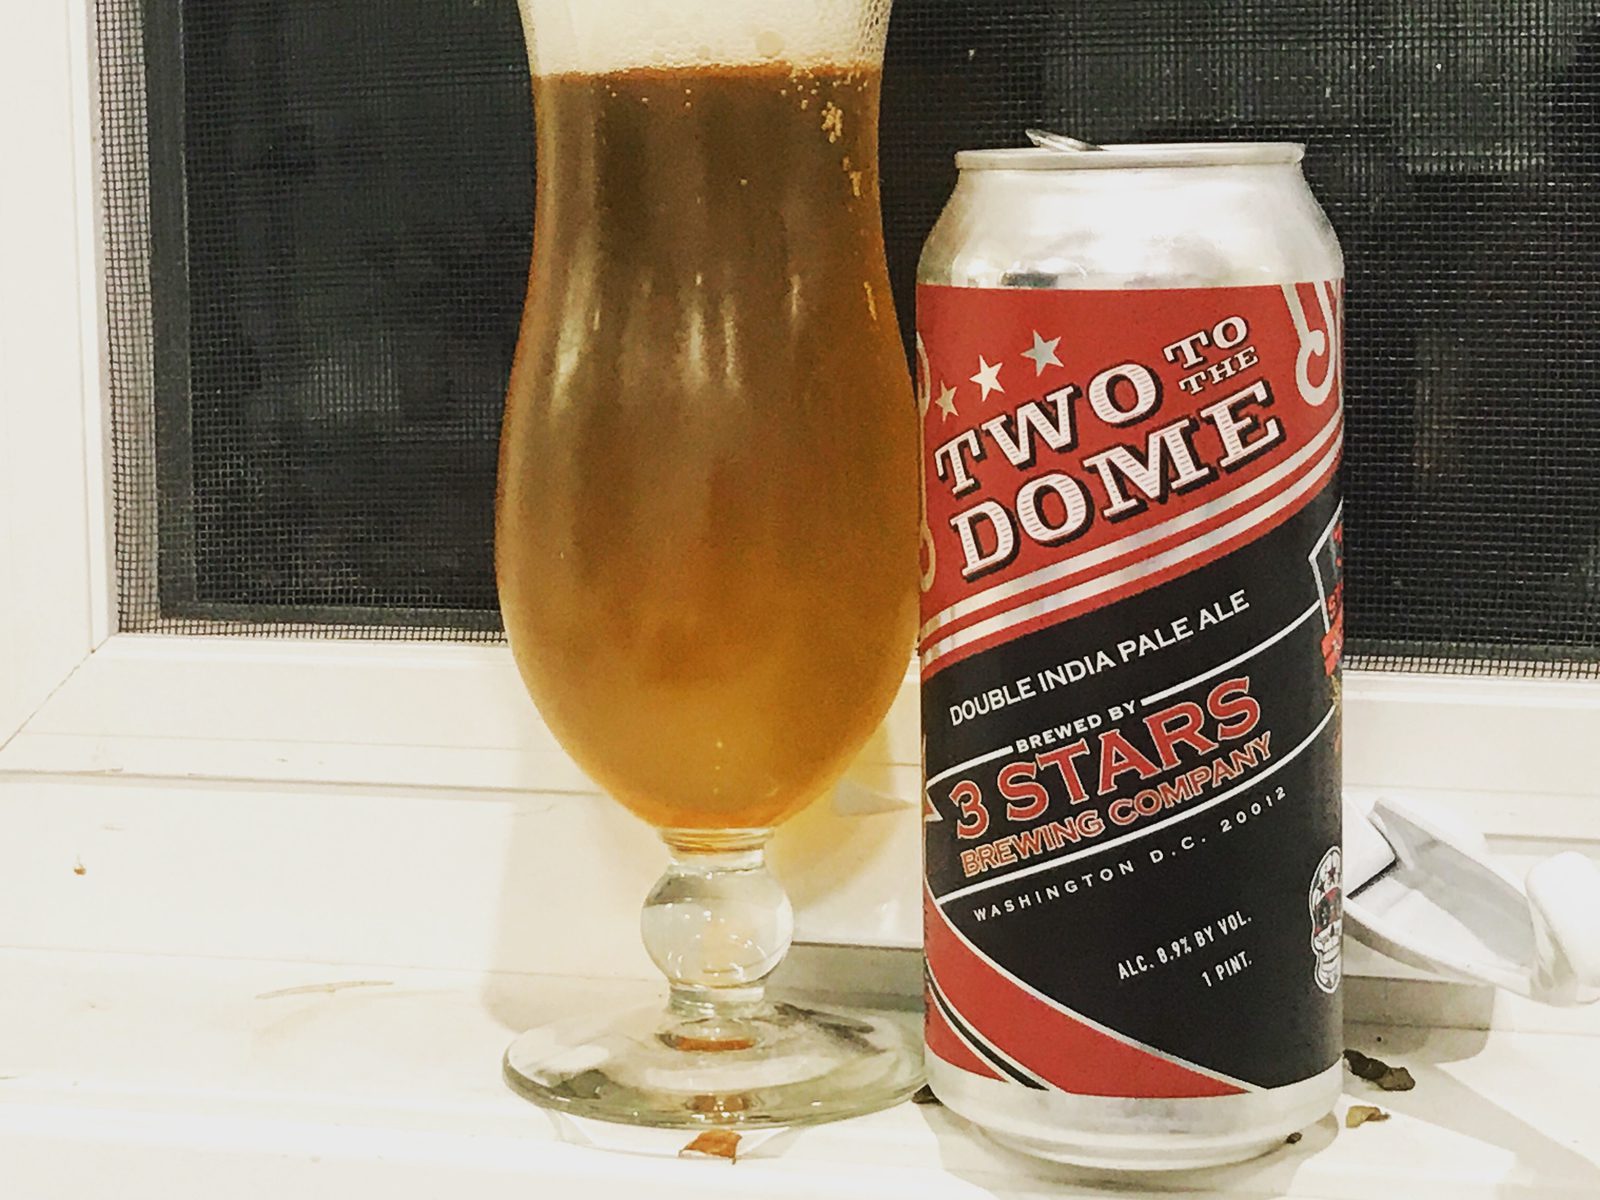 3 Stars Brewing Company: Two to the Dome